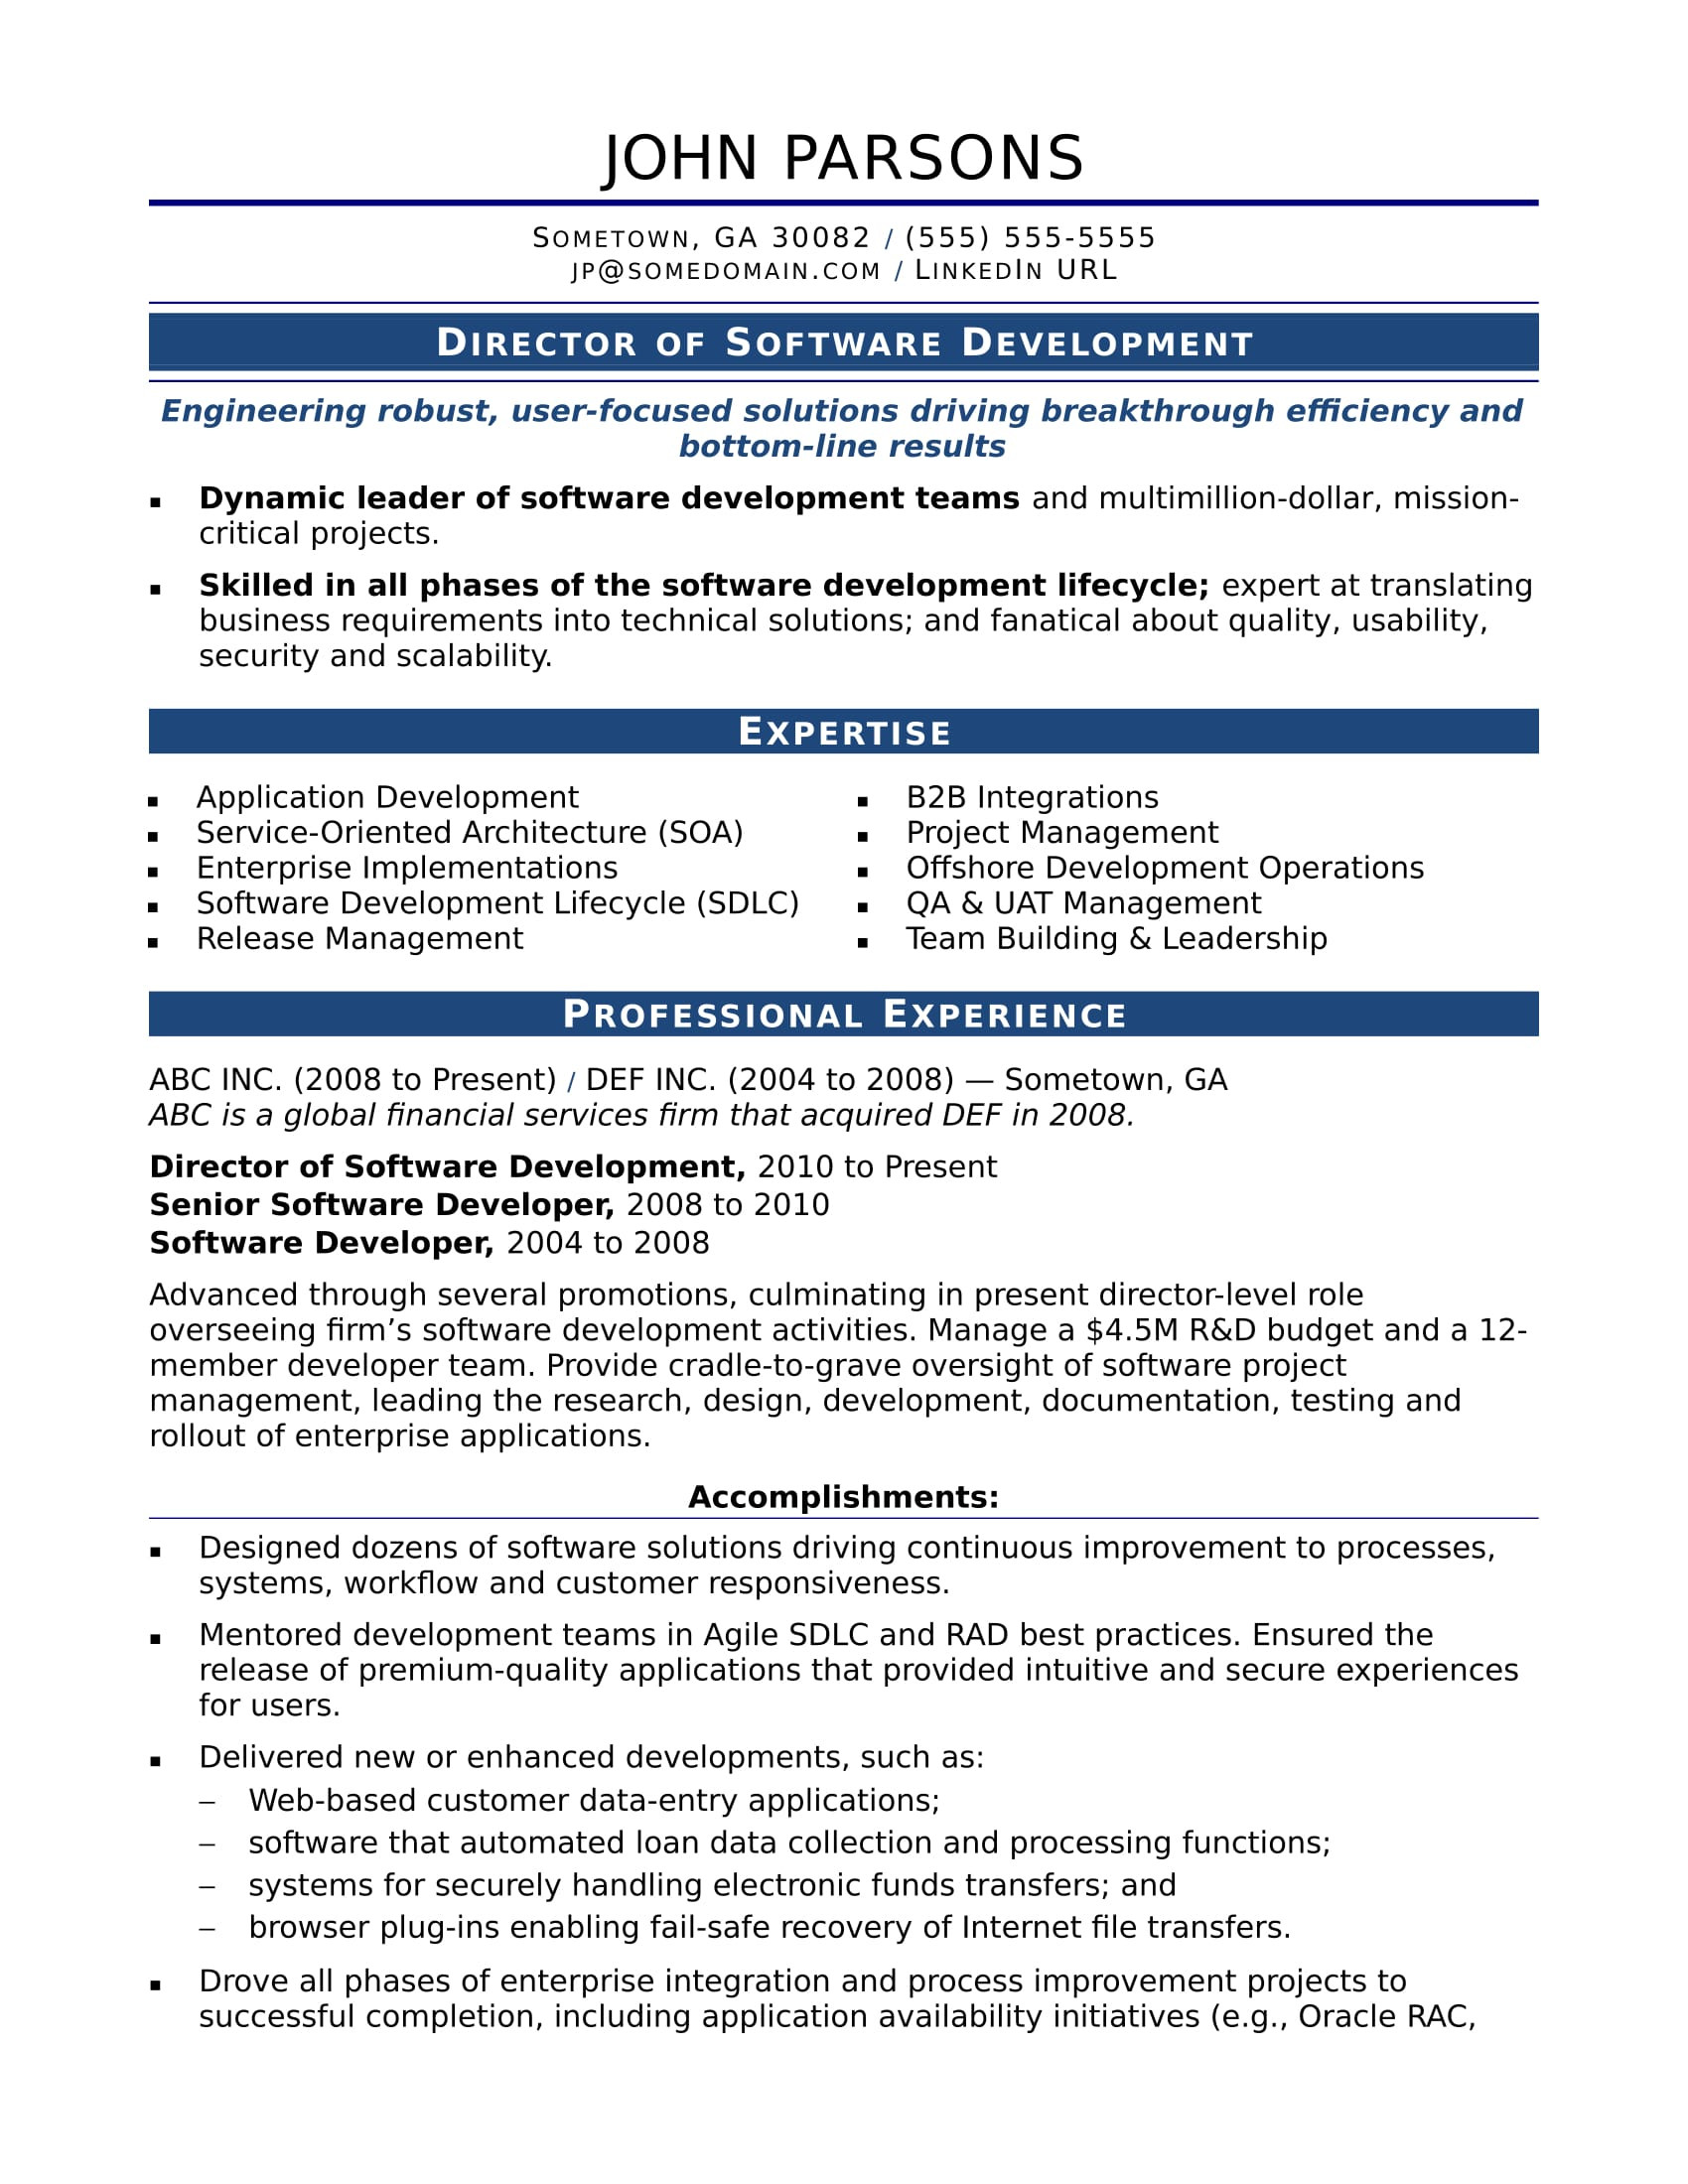 Resume Samples Of Engineer with 2 Years Work Experience Sample Resume for An Experienced It Developer Monster.com